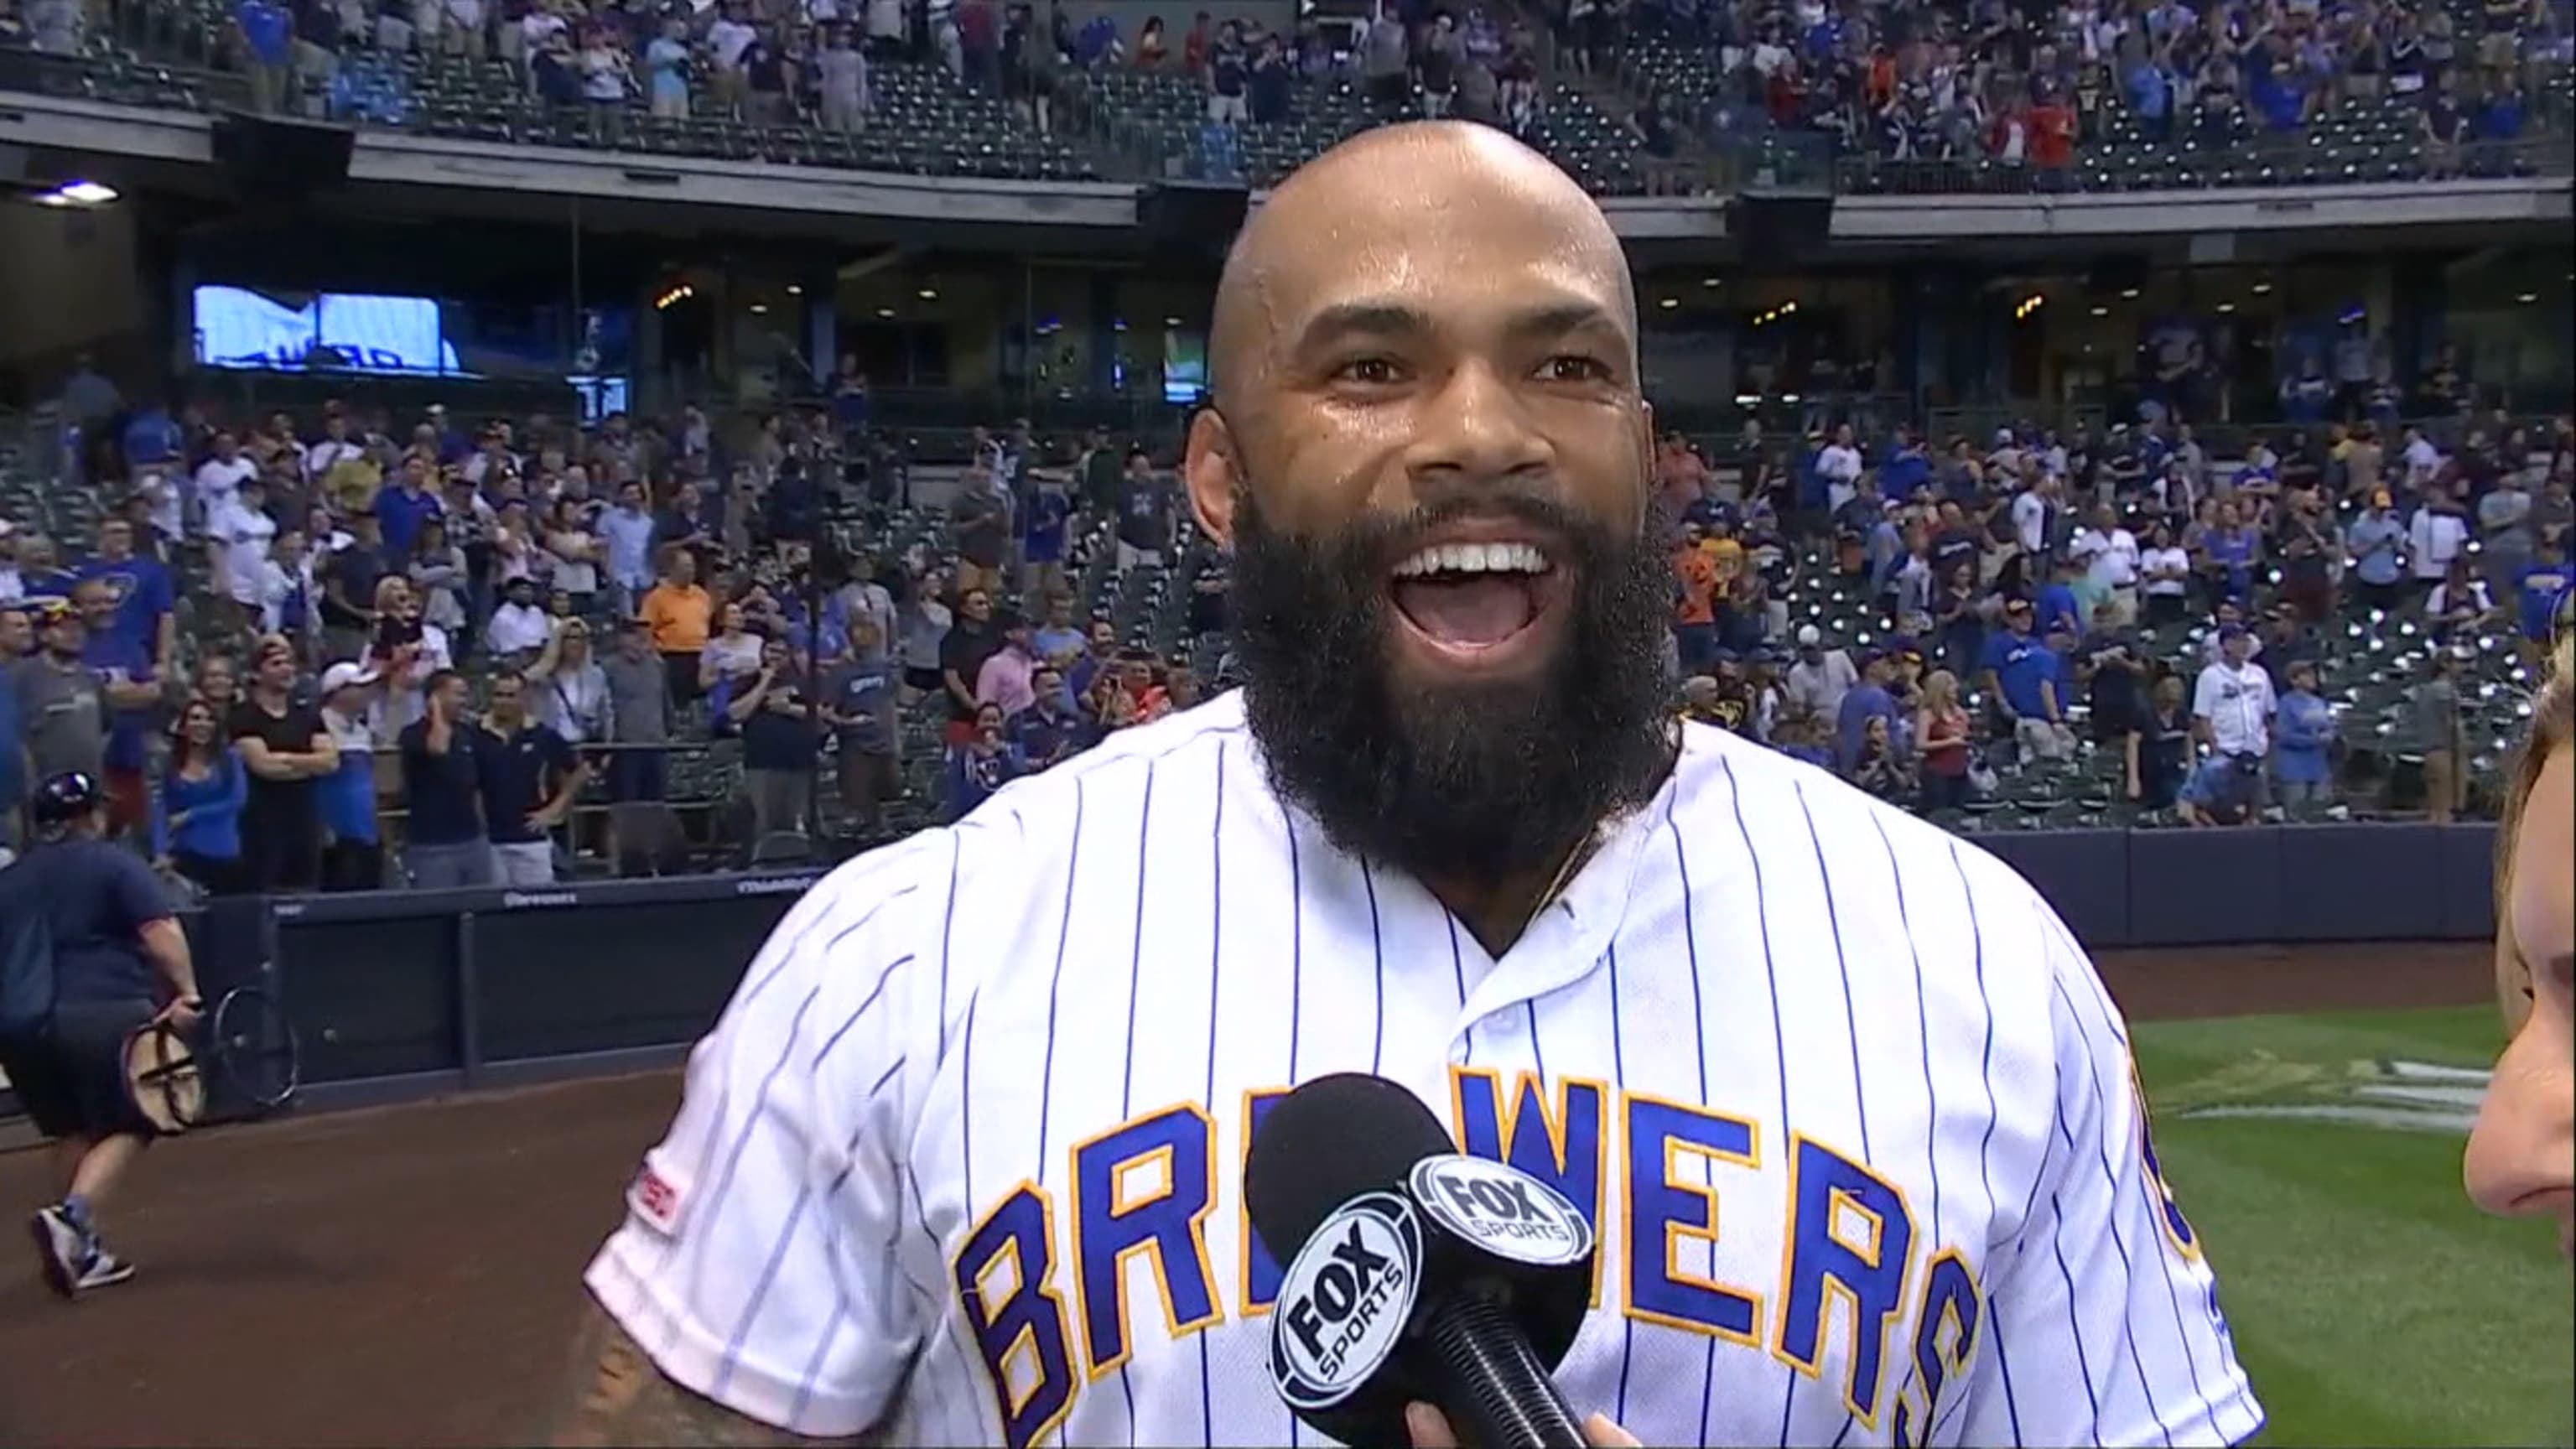 The Brewers were so excited about Eric Thames' walk-off HR that they ripped  off his jersey